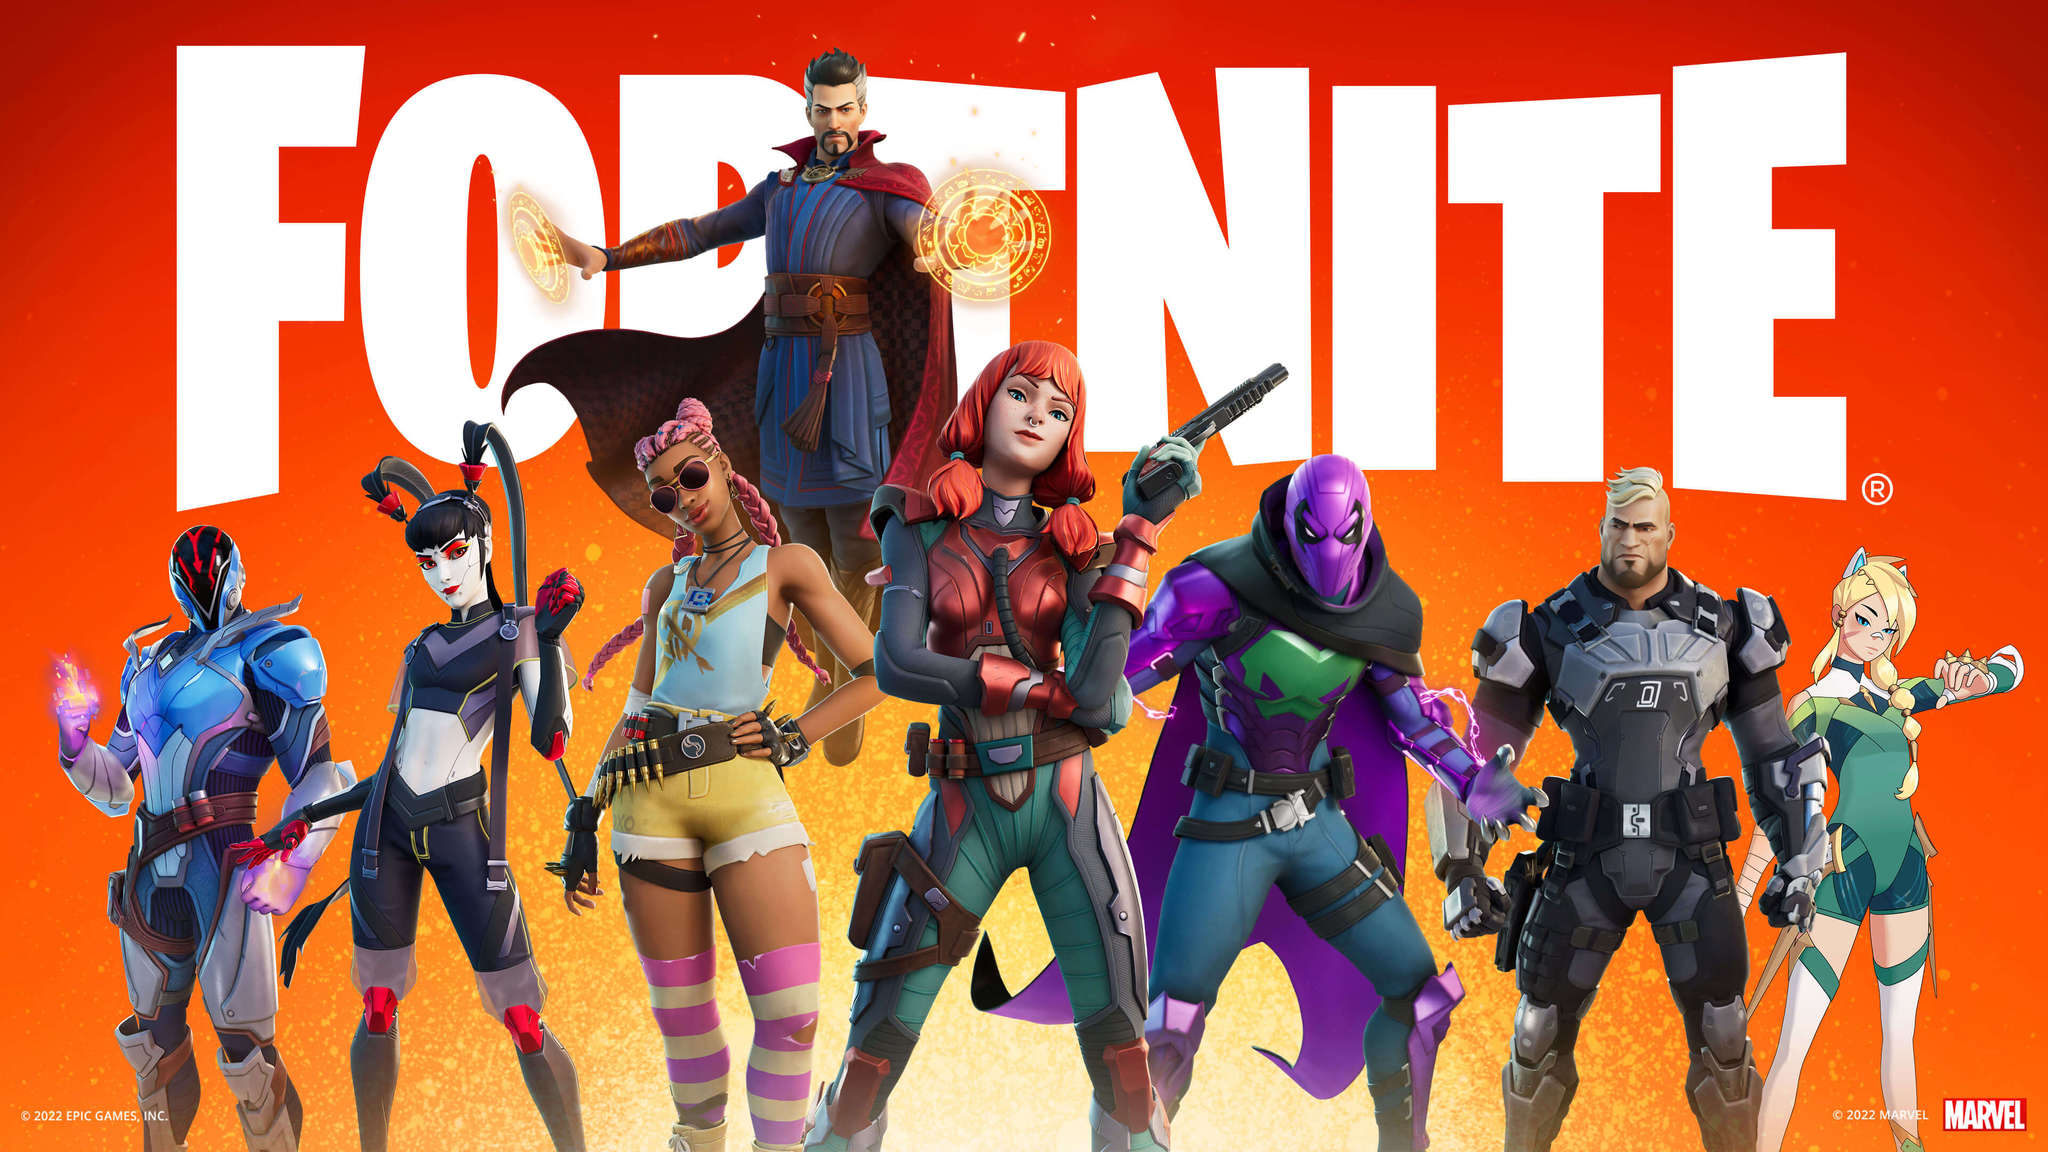 Fortnite' returns to iPhone on Xbox Cloud Gaming with no subscription  required